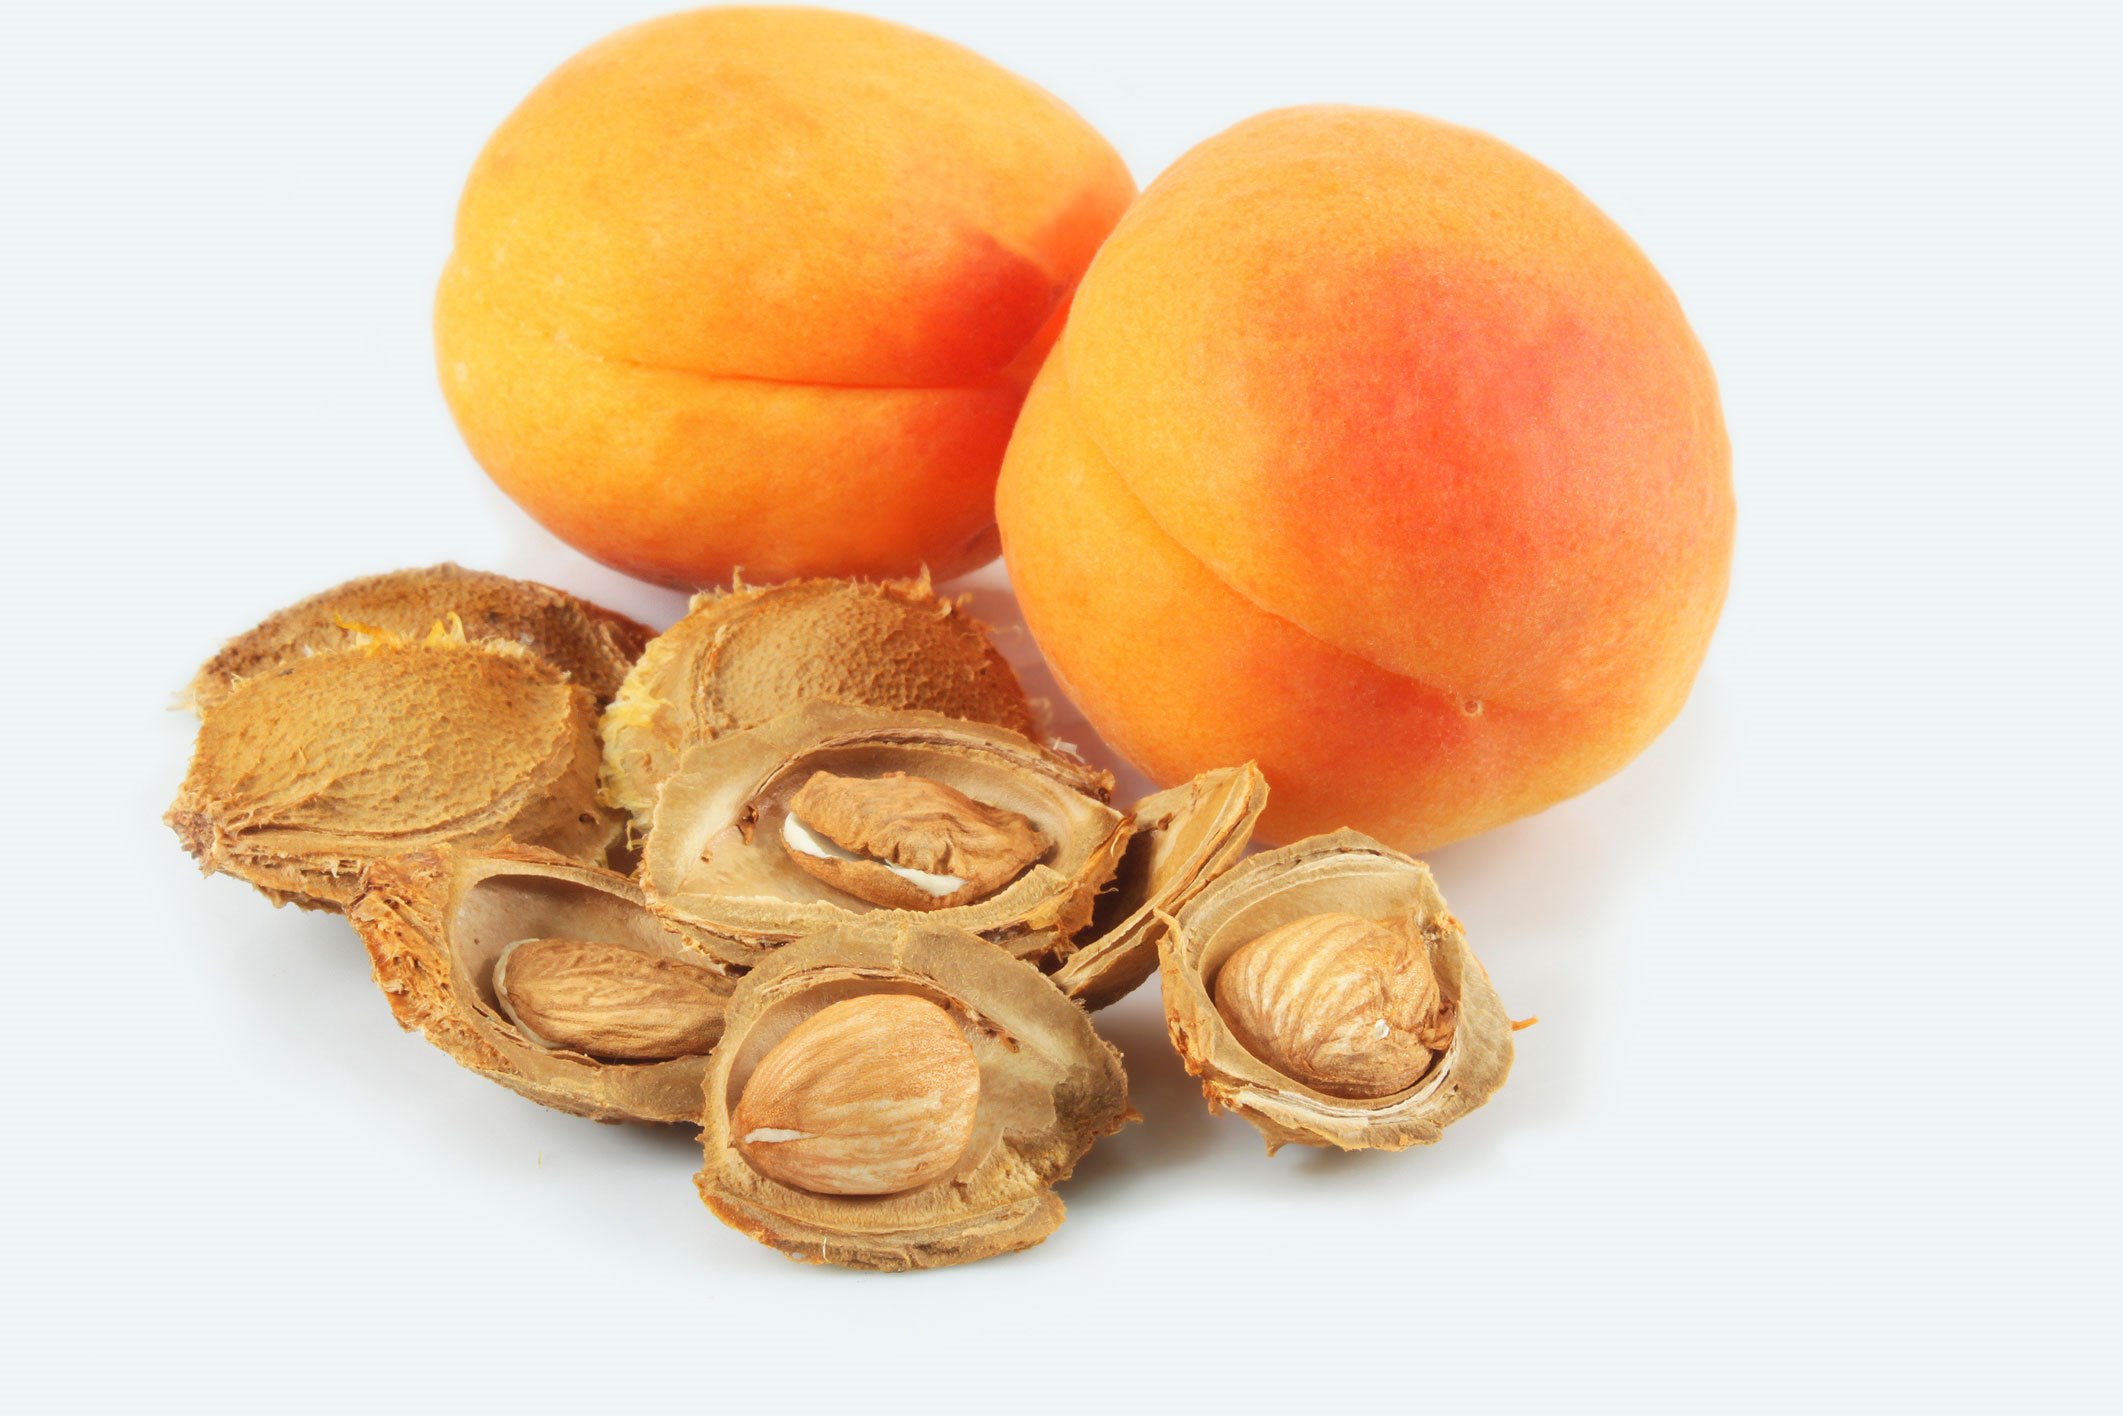 How To Plant Apricot Seeds